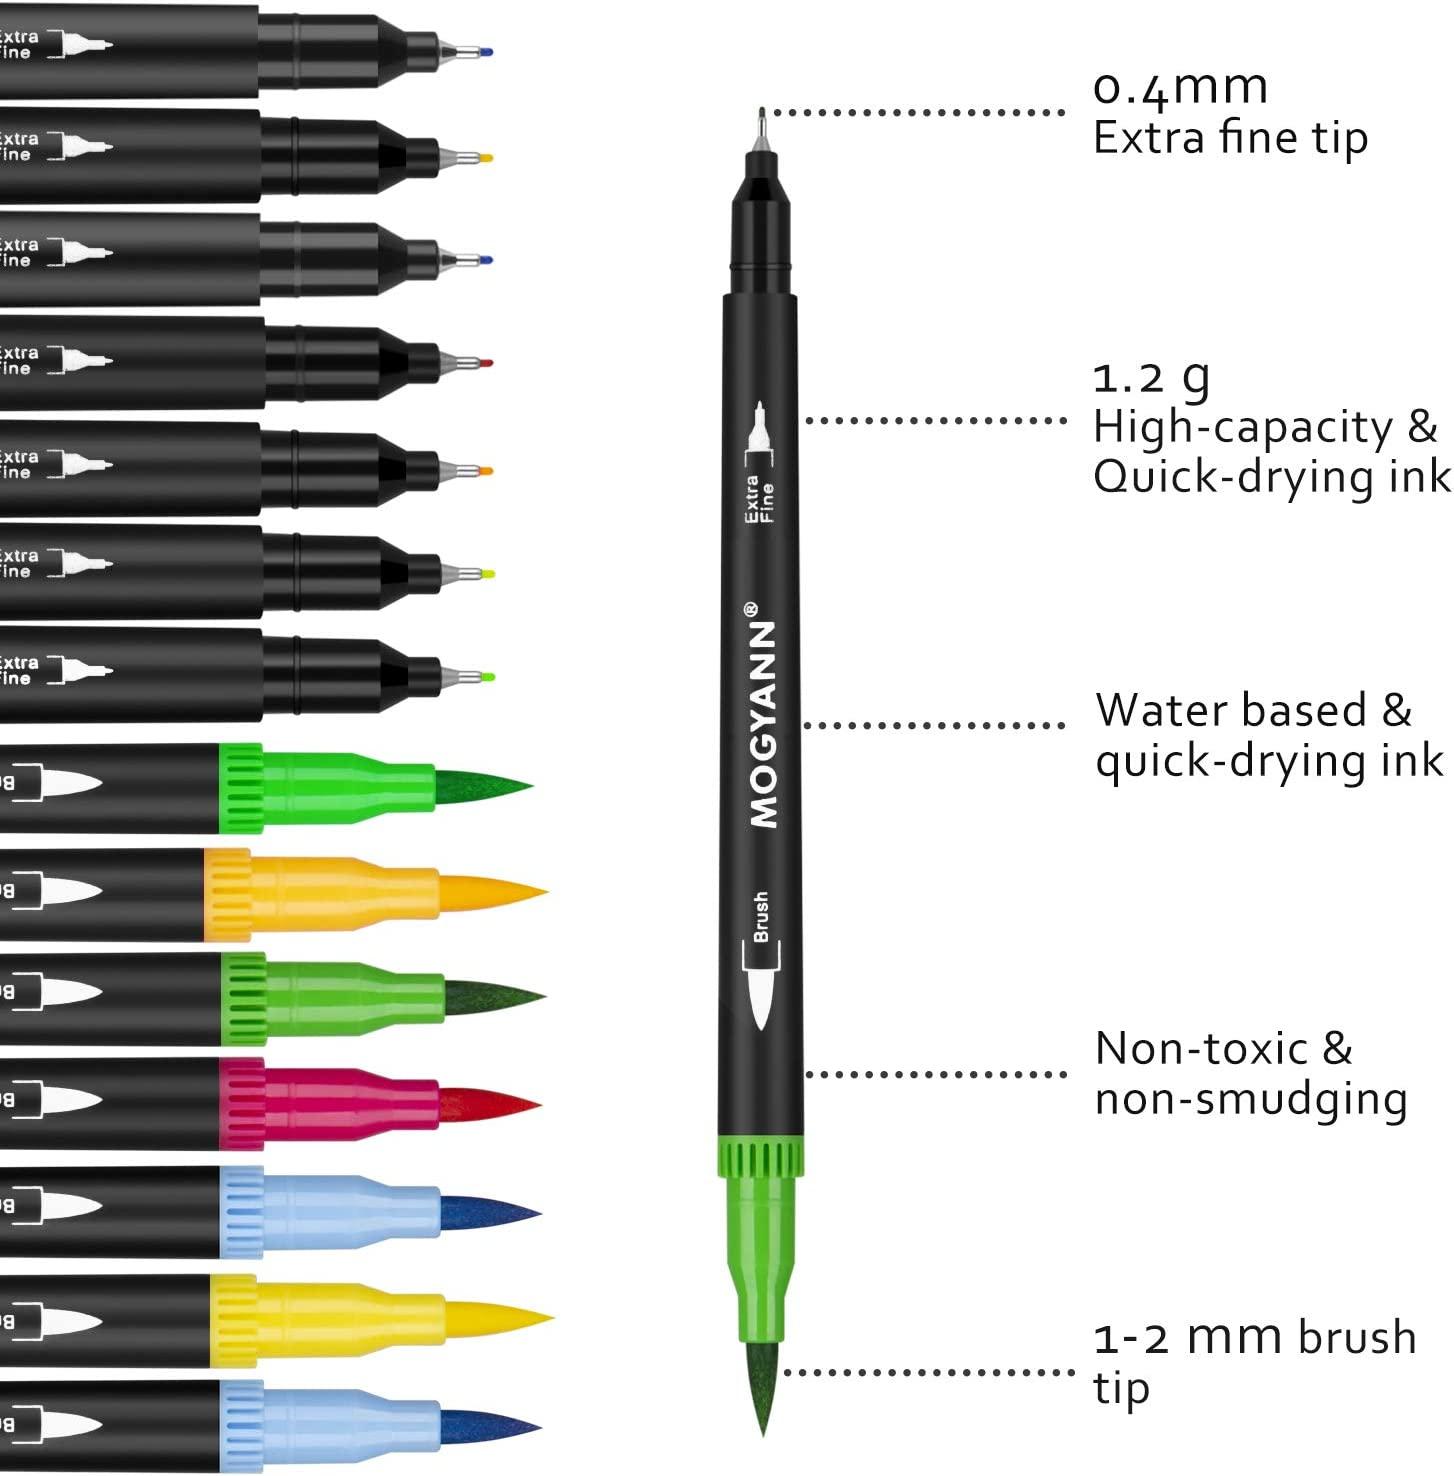 Mogyann Markers for Adult Coloring 72 Coloring Pens Dual Tip Brush Markers  for Coloring Books